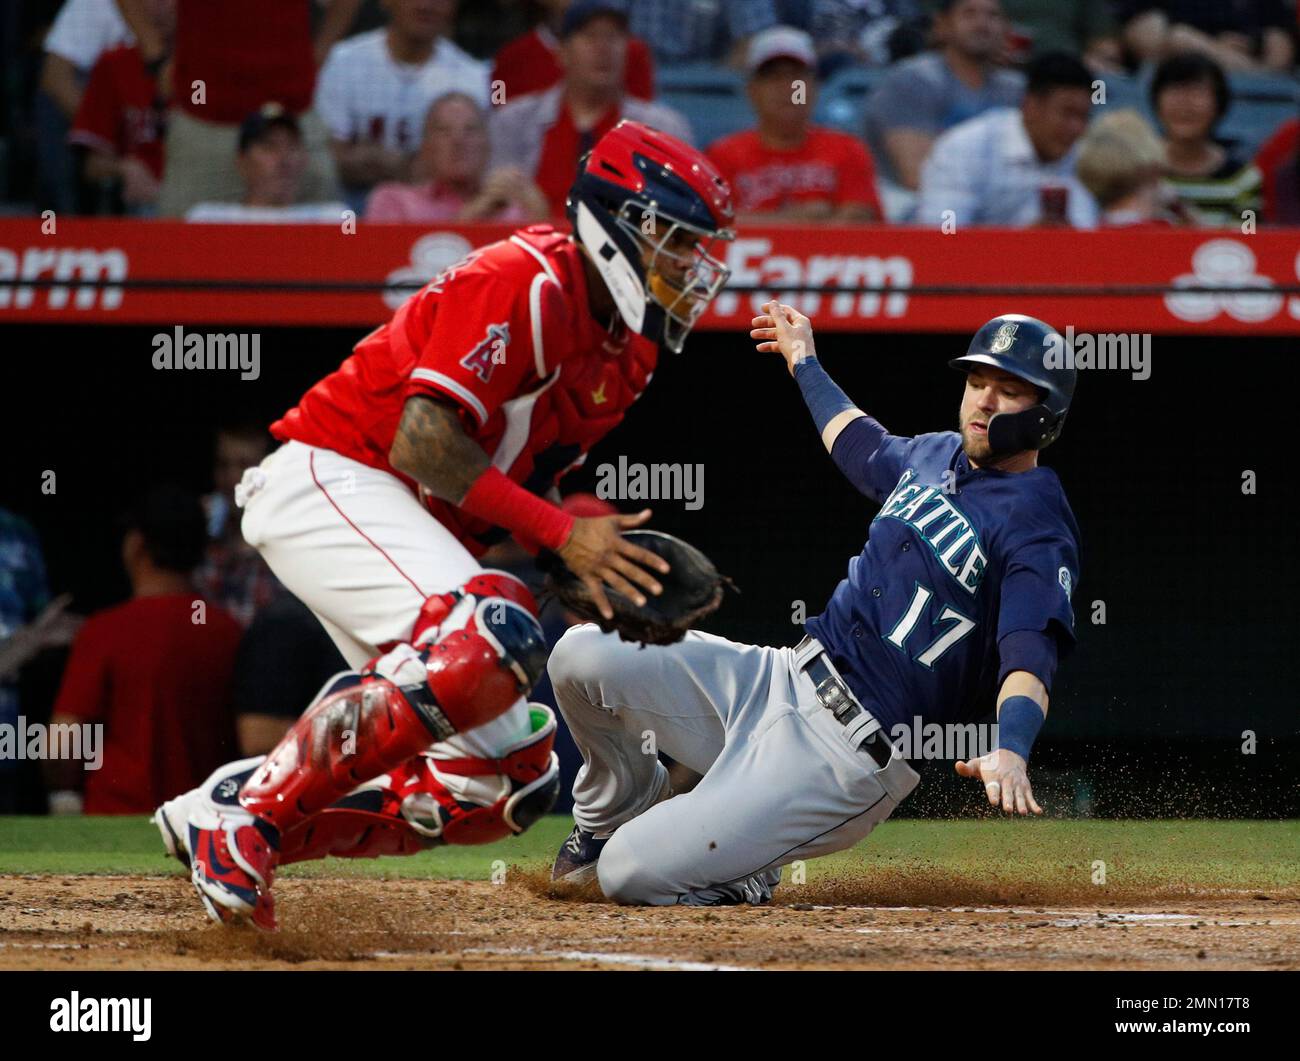 Seattle Mariners' Mitch Haniger waits for a pitch during an at-bat in a  baseball game, Sunday, June 20, 2021, in Seattle. The Mariners won 6-2 in  10 innings. (AP Photo/Stephen Brashear Stock